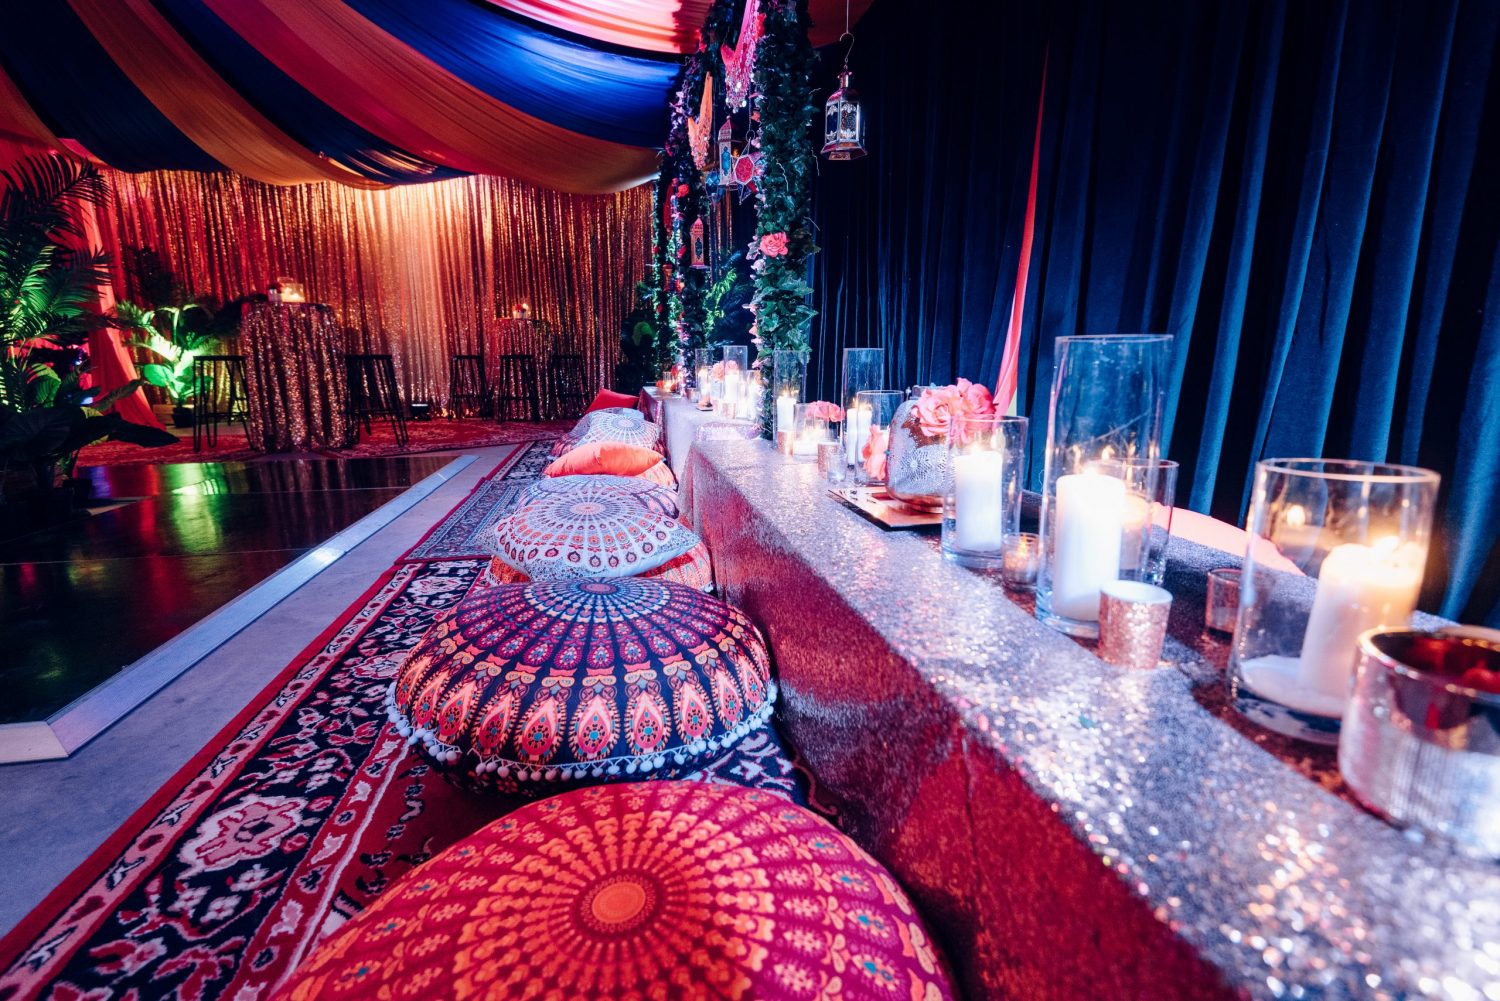 arabian nights themed event table setup with cushions